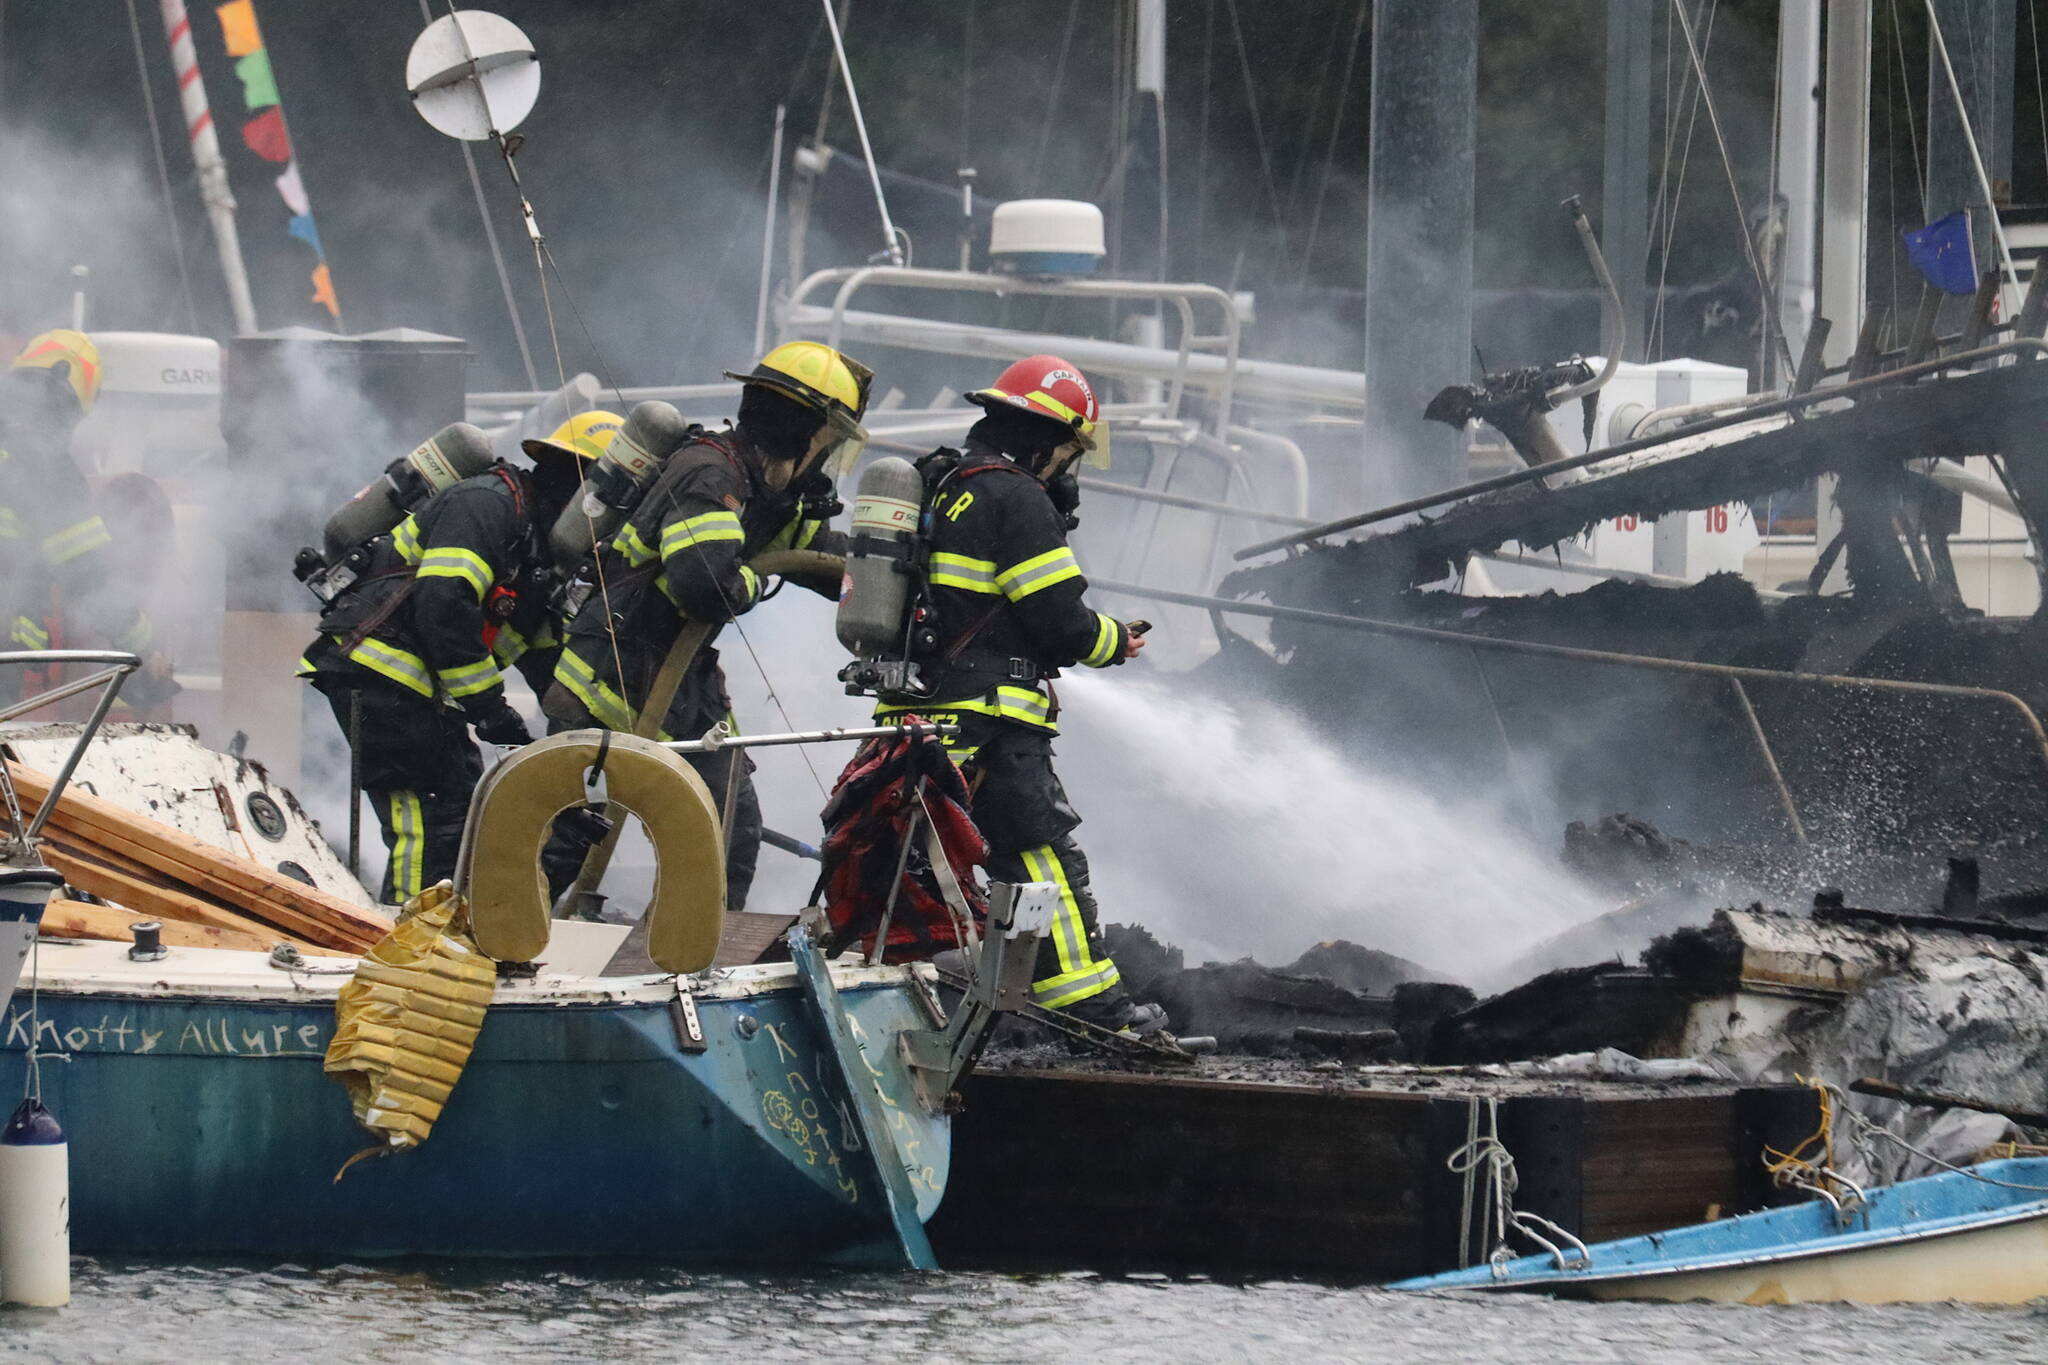 Capital City Fire/Rescue firefighters spray the smoldering remains of a fire that spread to three boats in Douglas Harbor on Monday evening. (Mark Sabbatini / Juneau Empire)